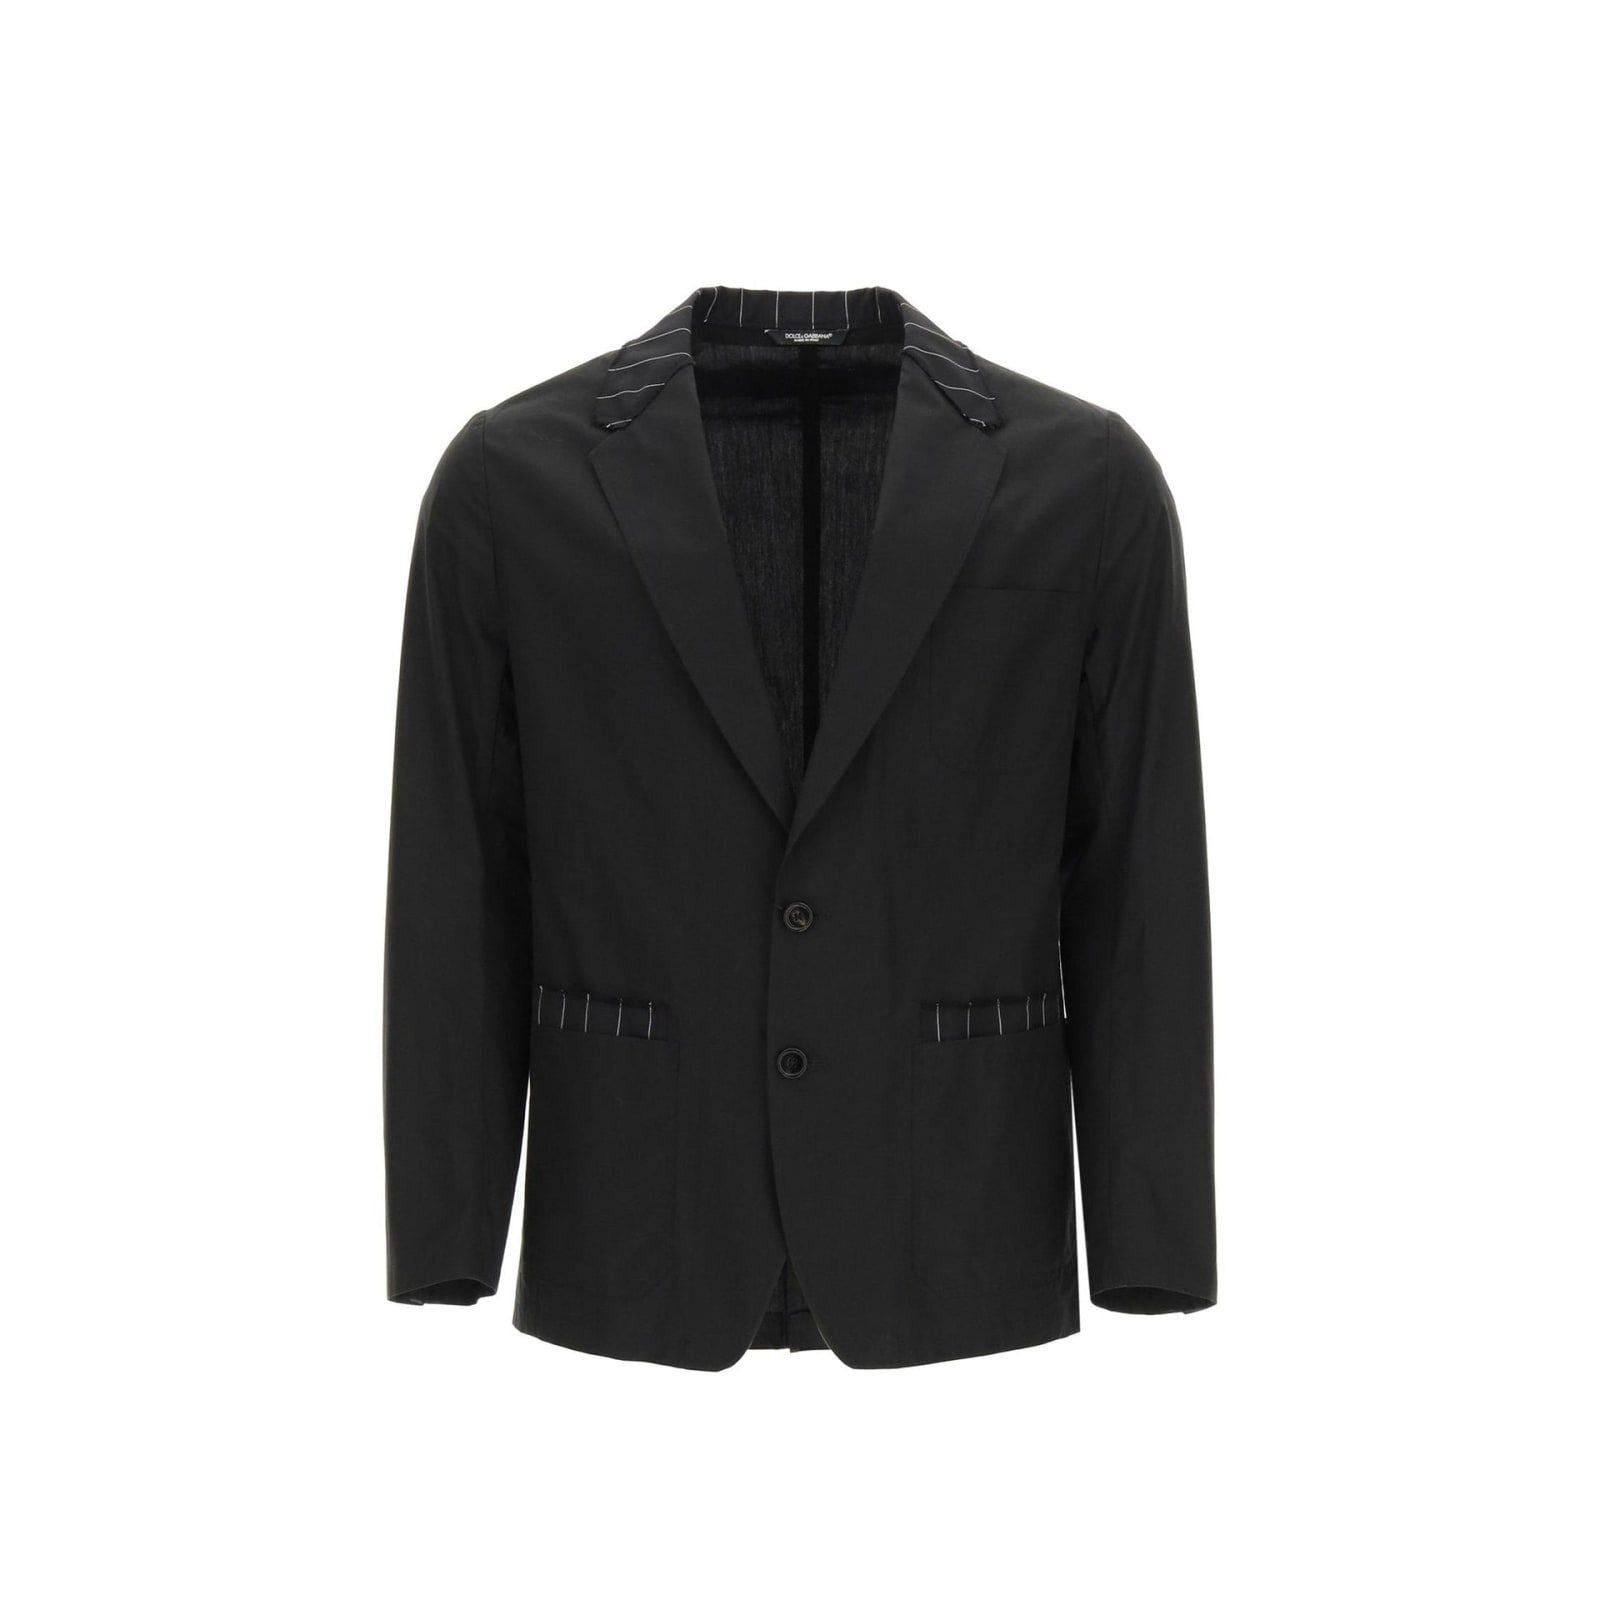 Deconstructed Tailored Jacket